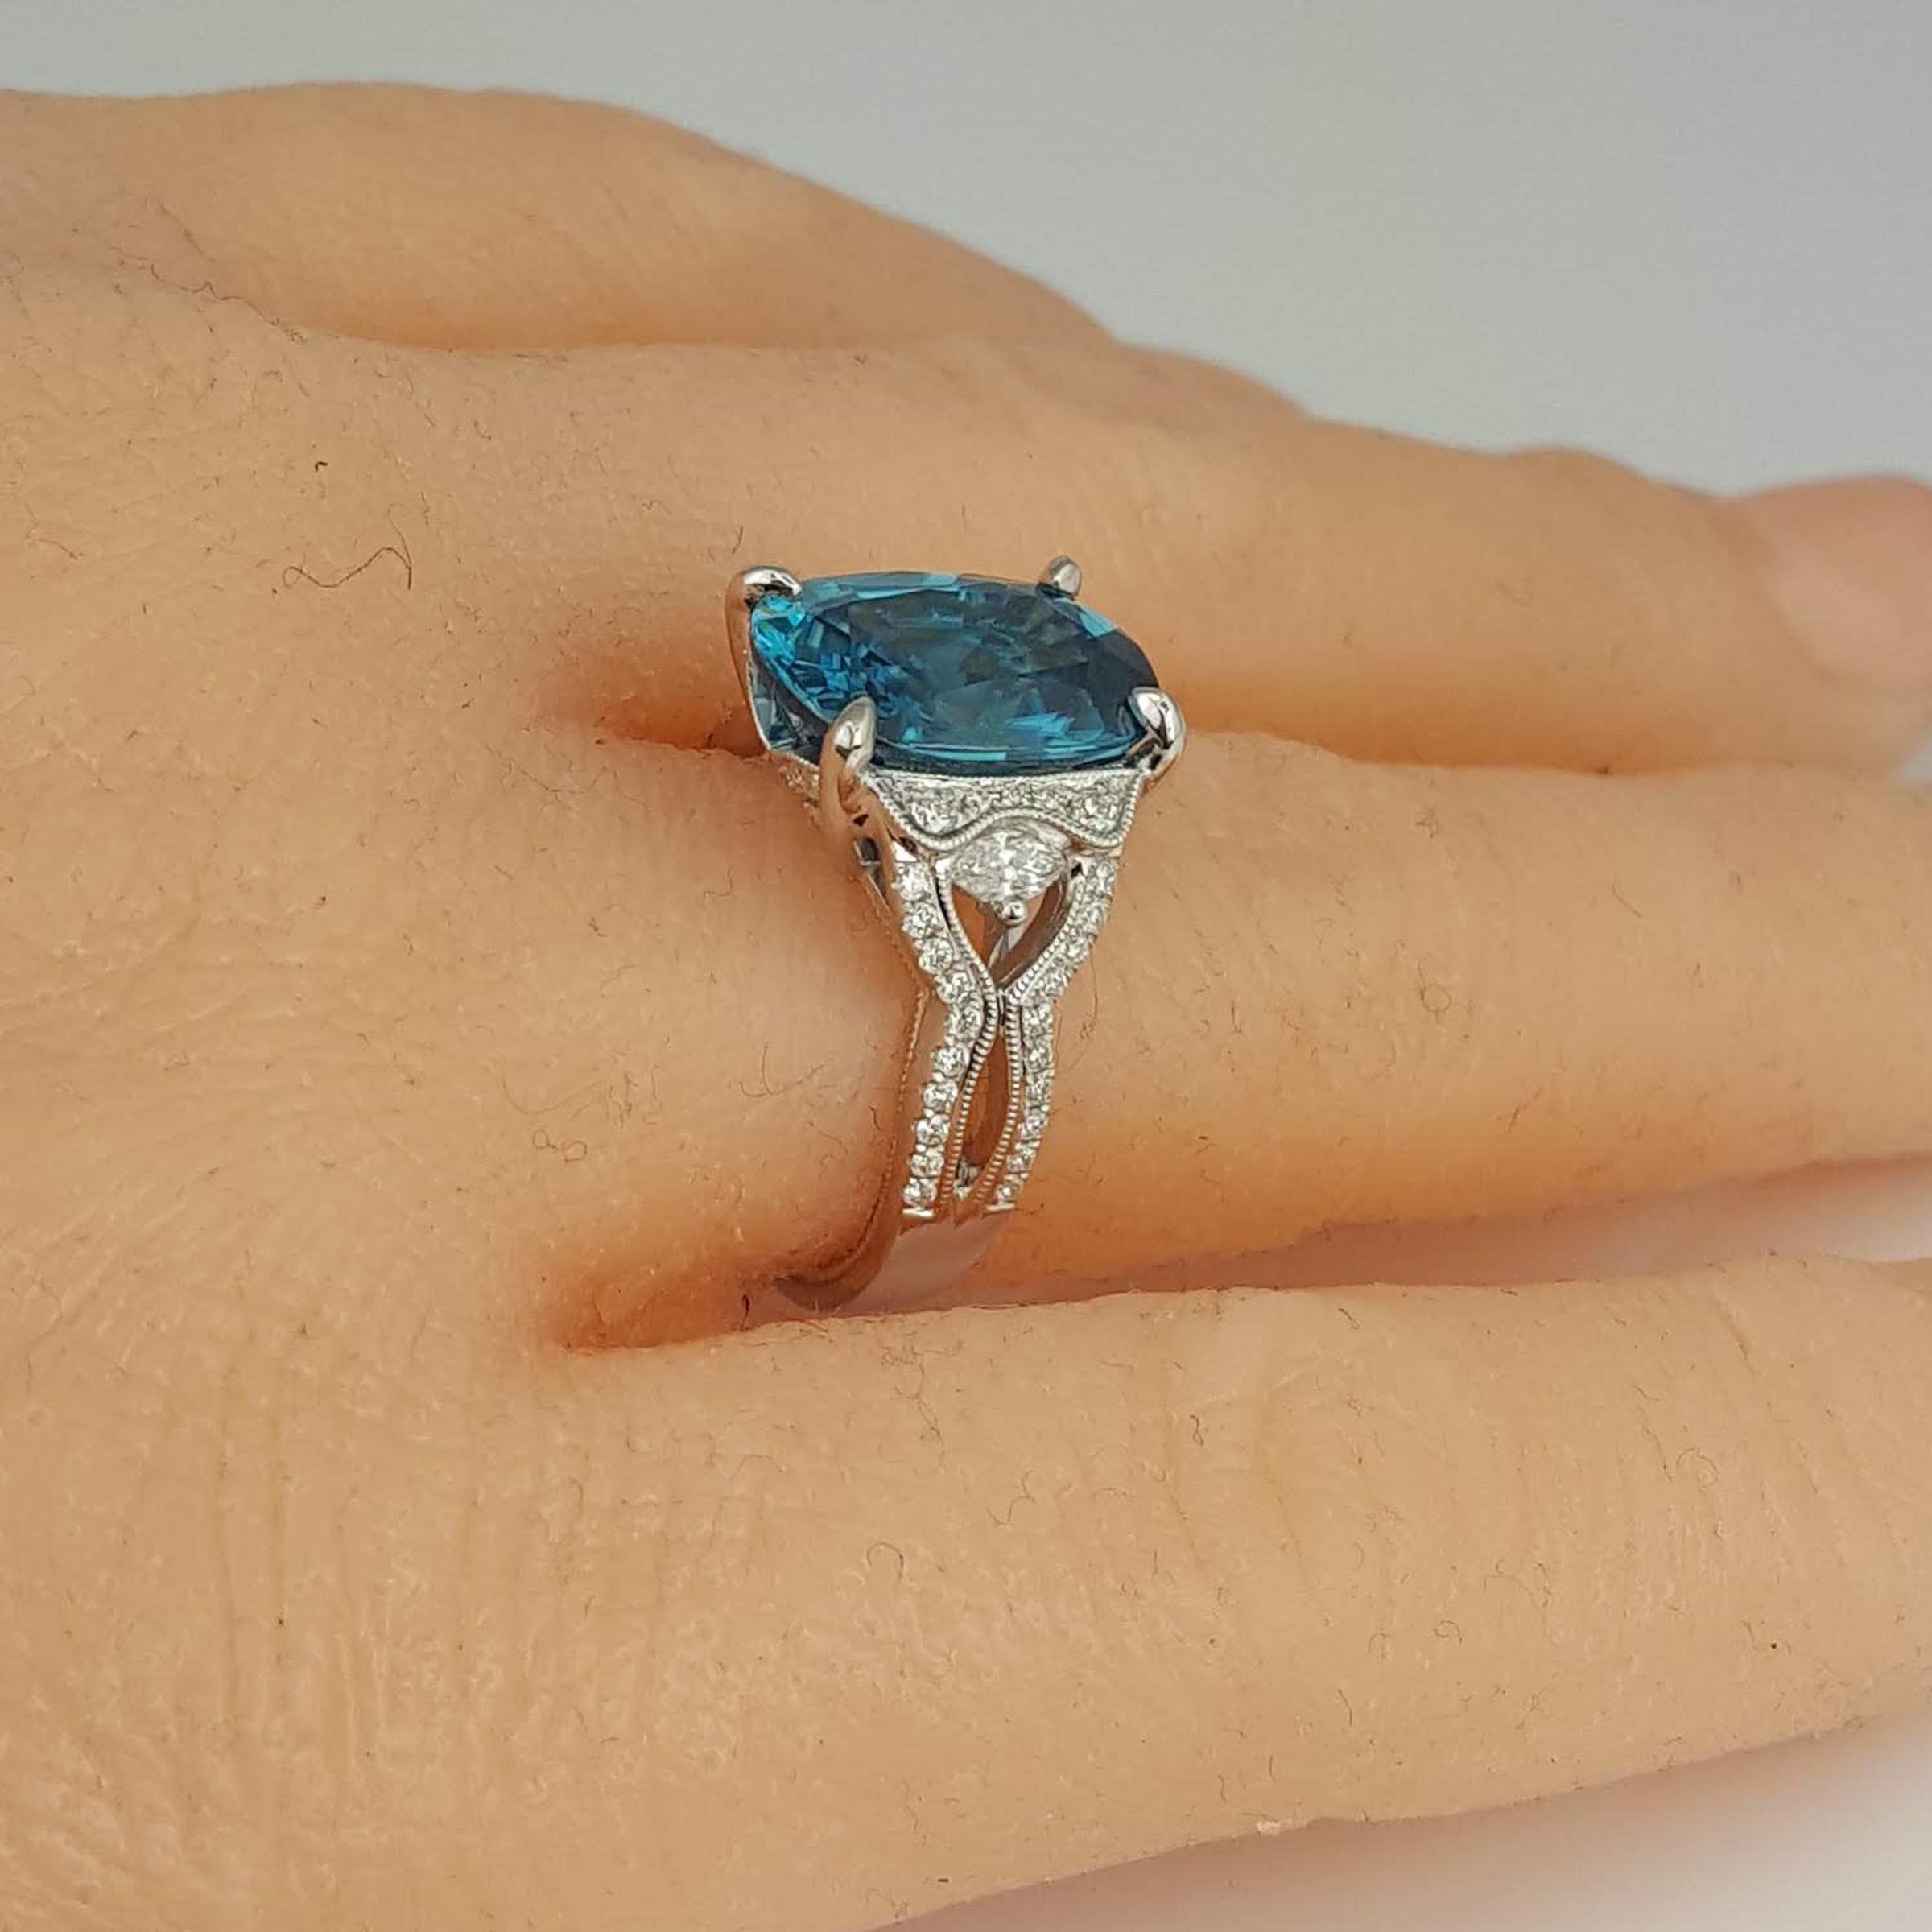 9.98 Ct Oval Cut Blue Zircon and 0.54 Carat Natural Diamond Ring in 18W ref1361 For Sale 2